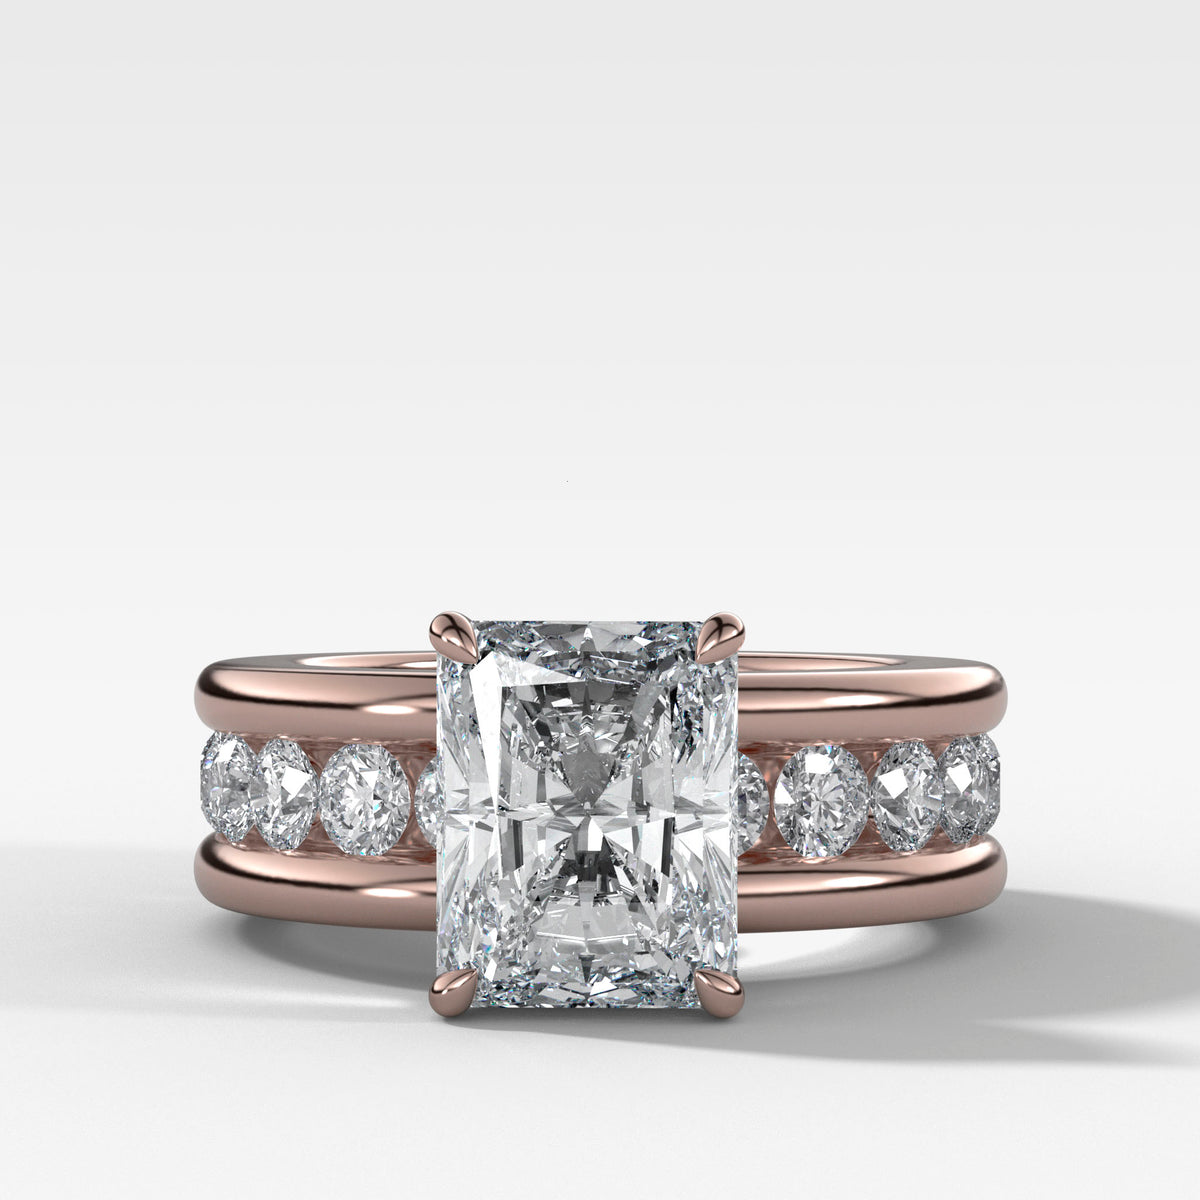 Chunky Channel Set Engagement Ring with Radiant Cut Diamond